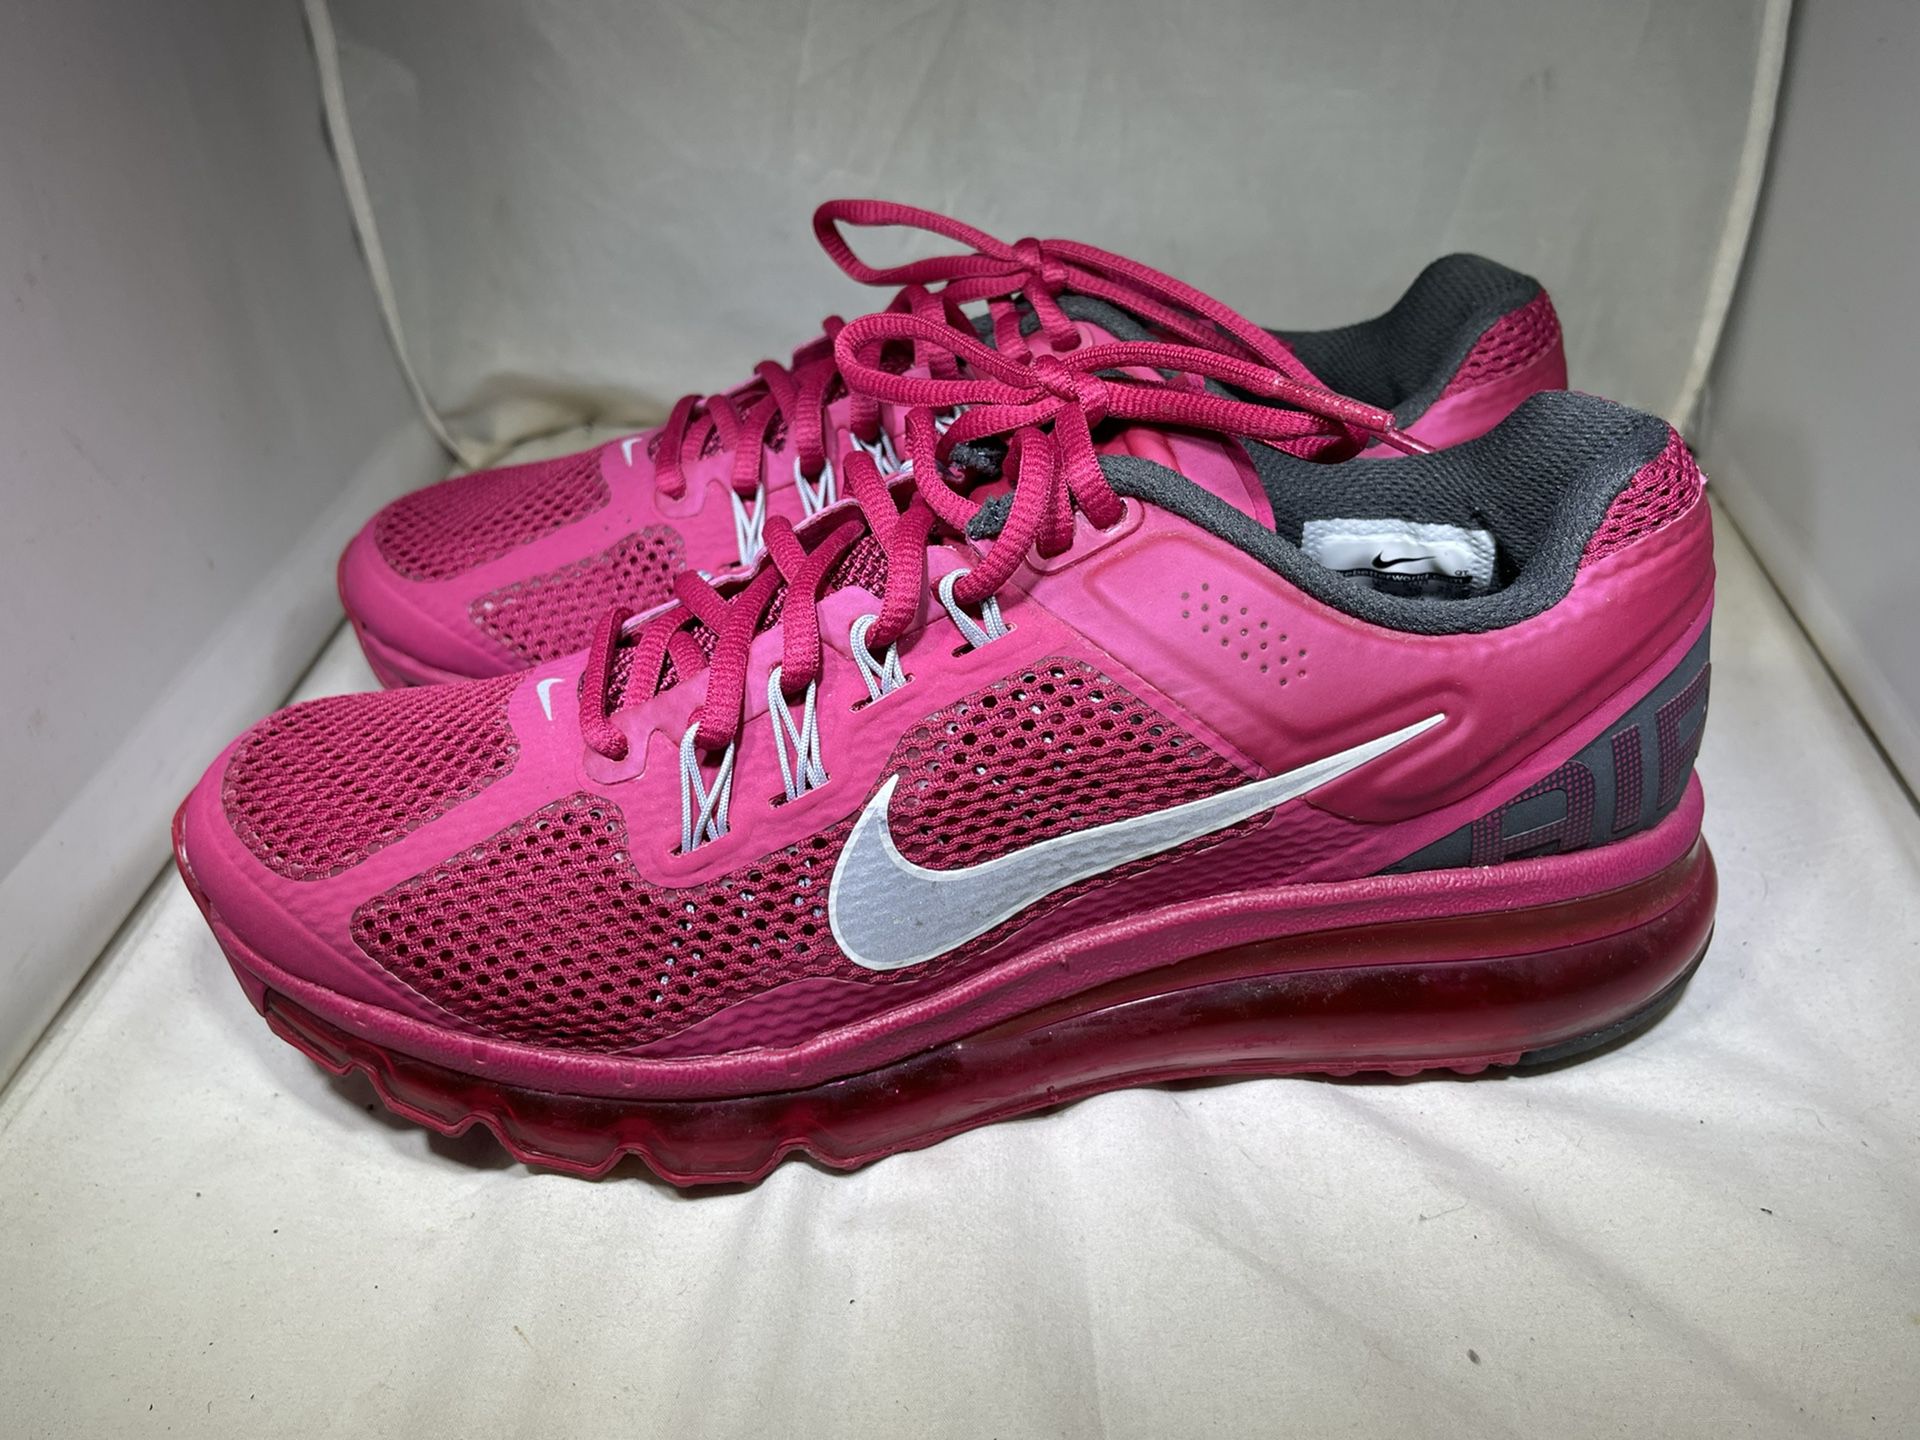 PreOwned Nike Max Fitsole Fuchsia Pink Running Shoes Women's 8.5 for Sale in Waipahu, HI - OfferUp